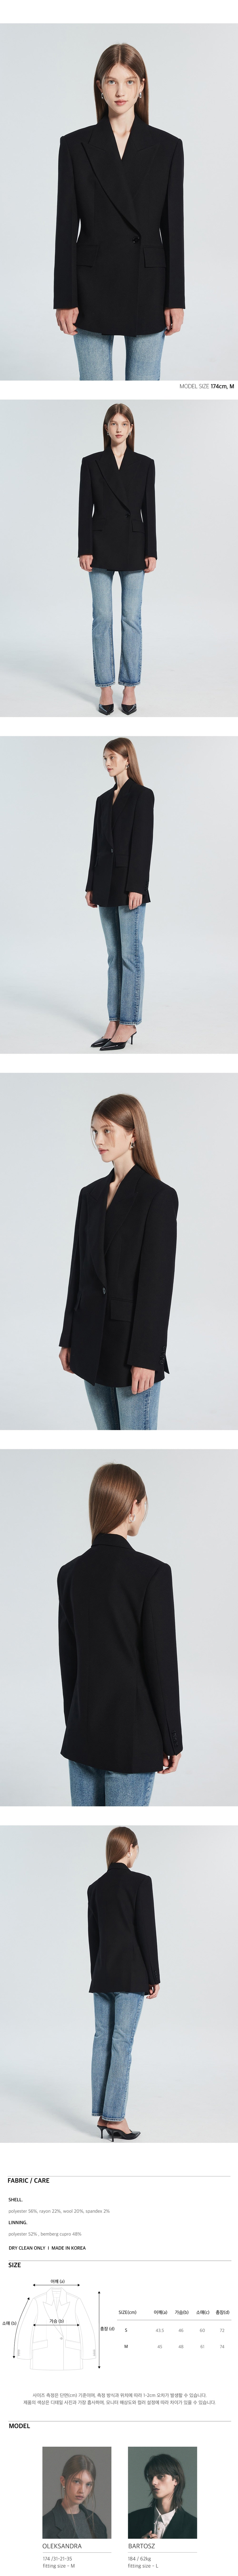 WOOL BLEND DOUBLE BREASTED JACKET (BLACK)